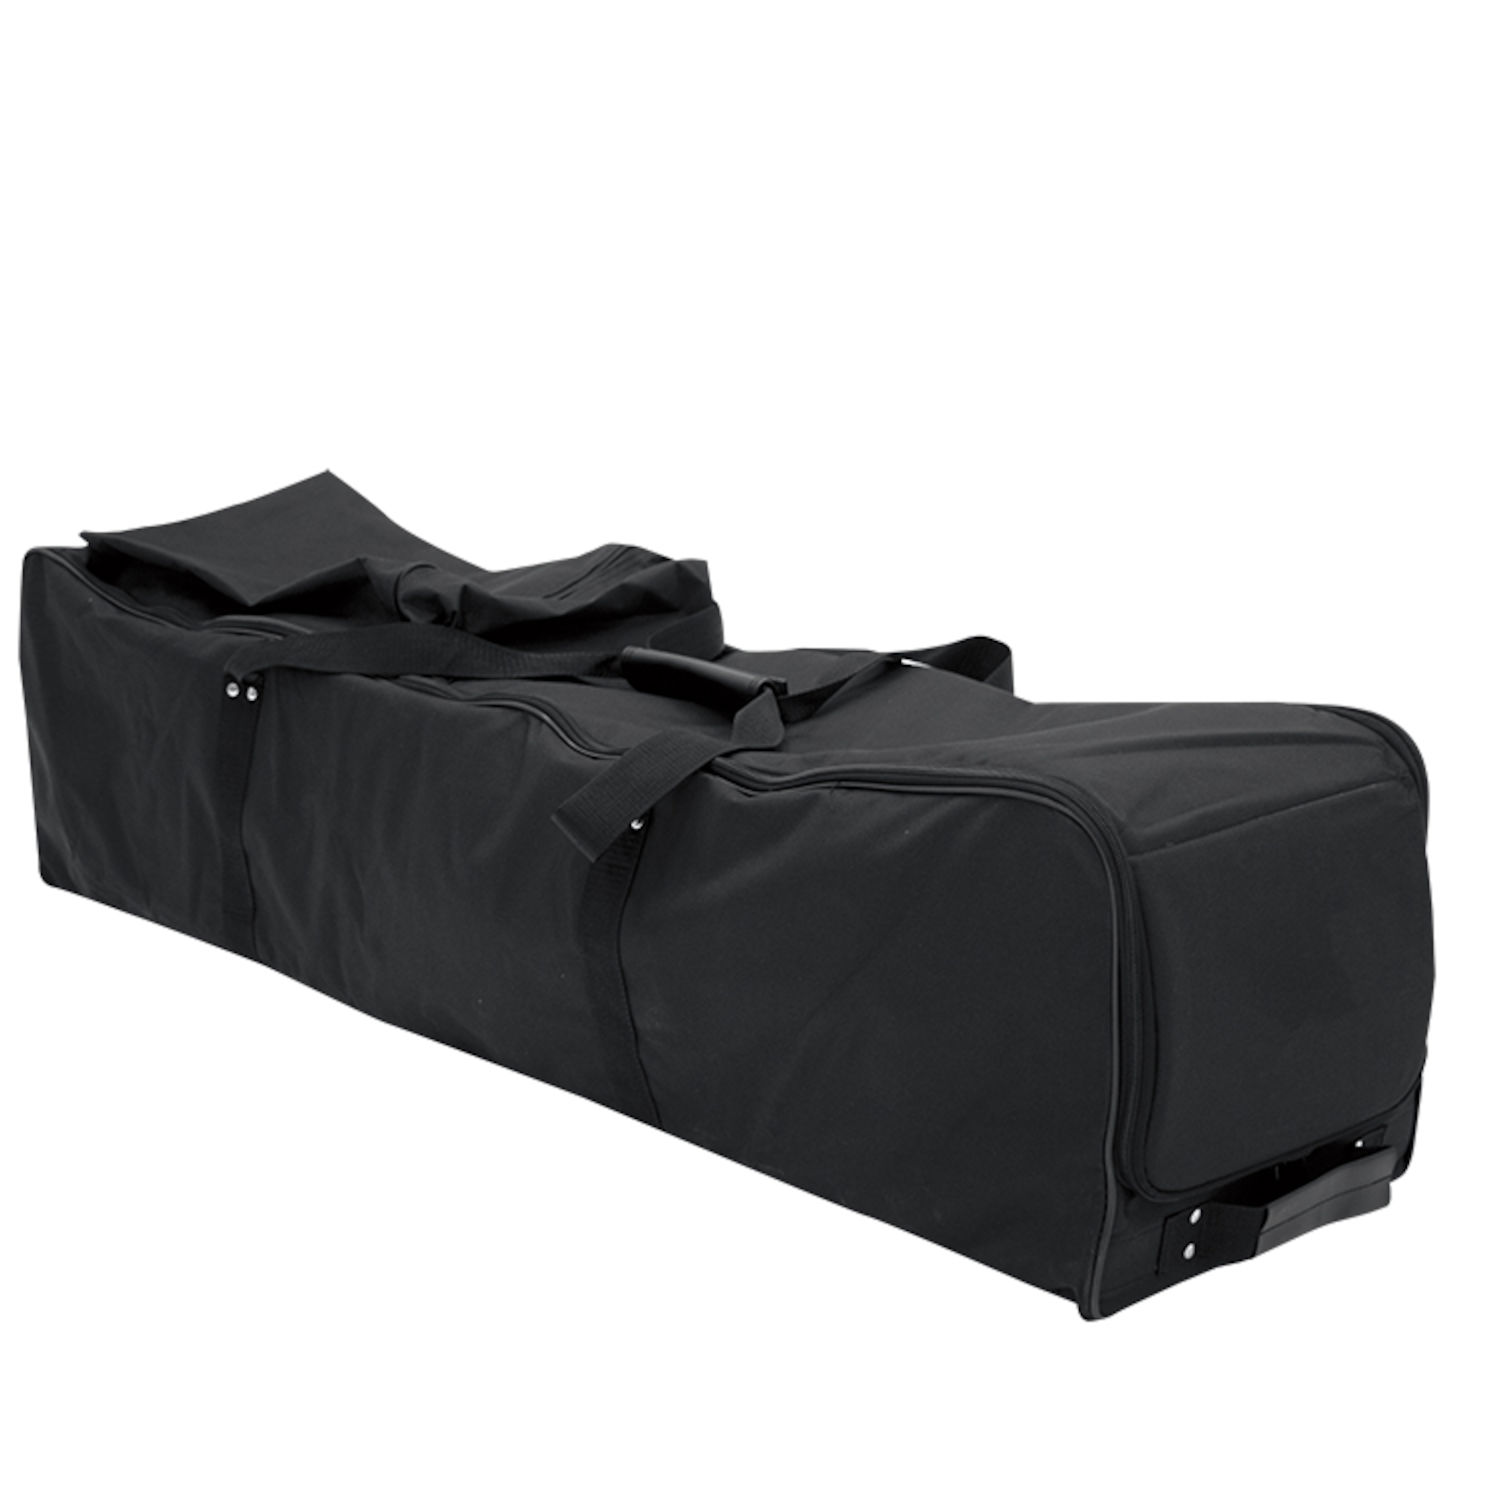 Compact 10' Tent Soft Carry Case with Wheels